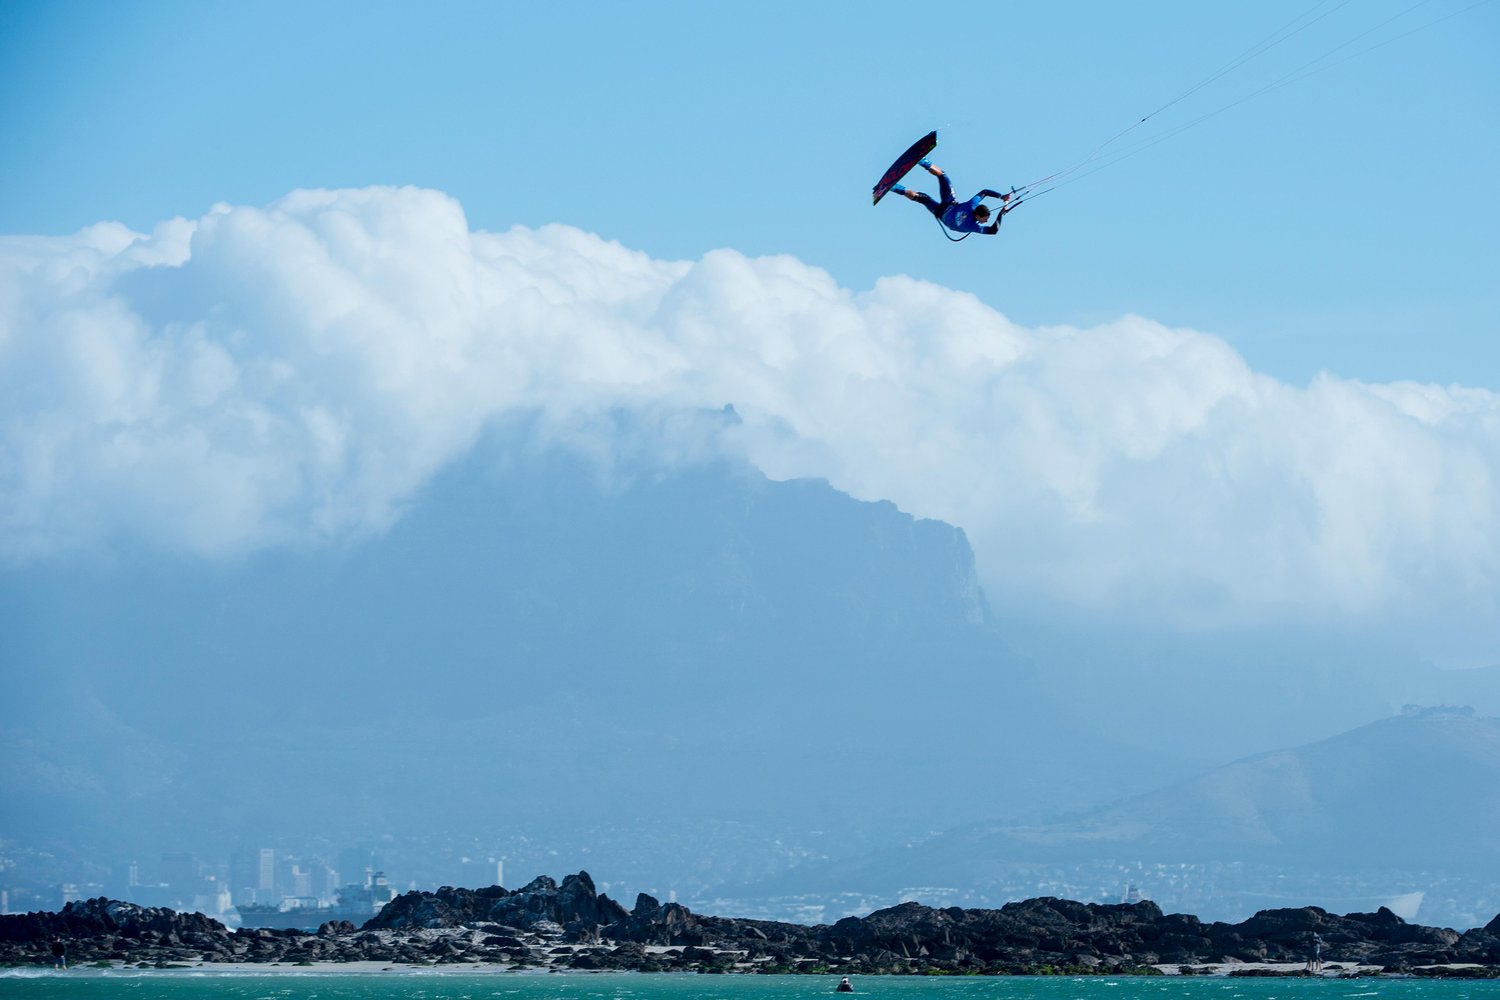  Kite Boarding  King of the Air  Cape Town RSA  Day 3  Live aujourd'hui